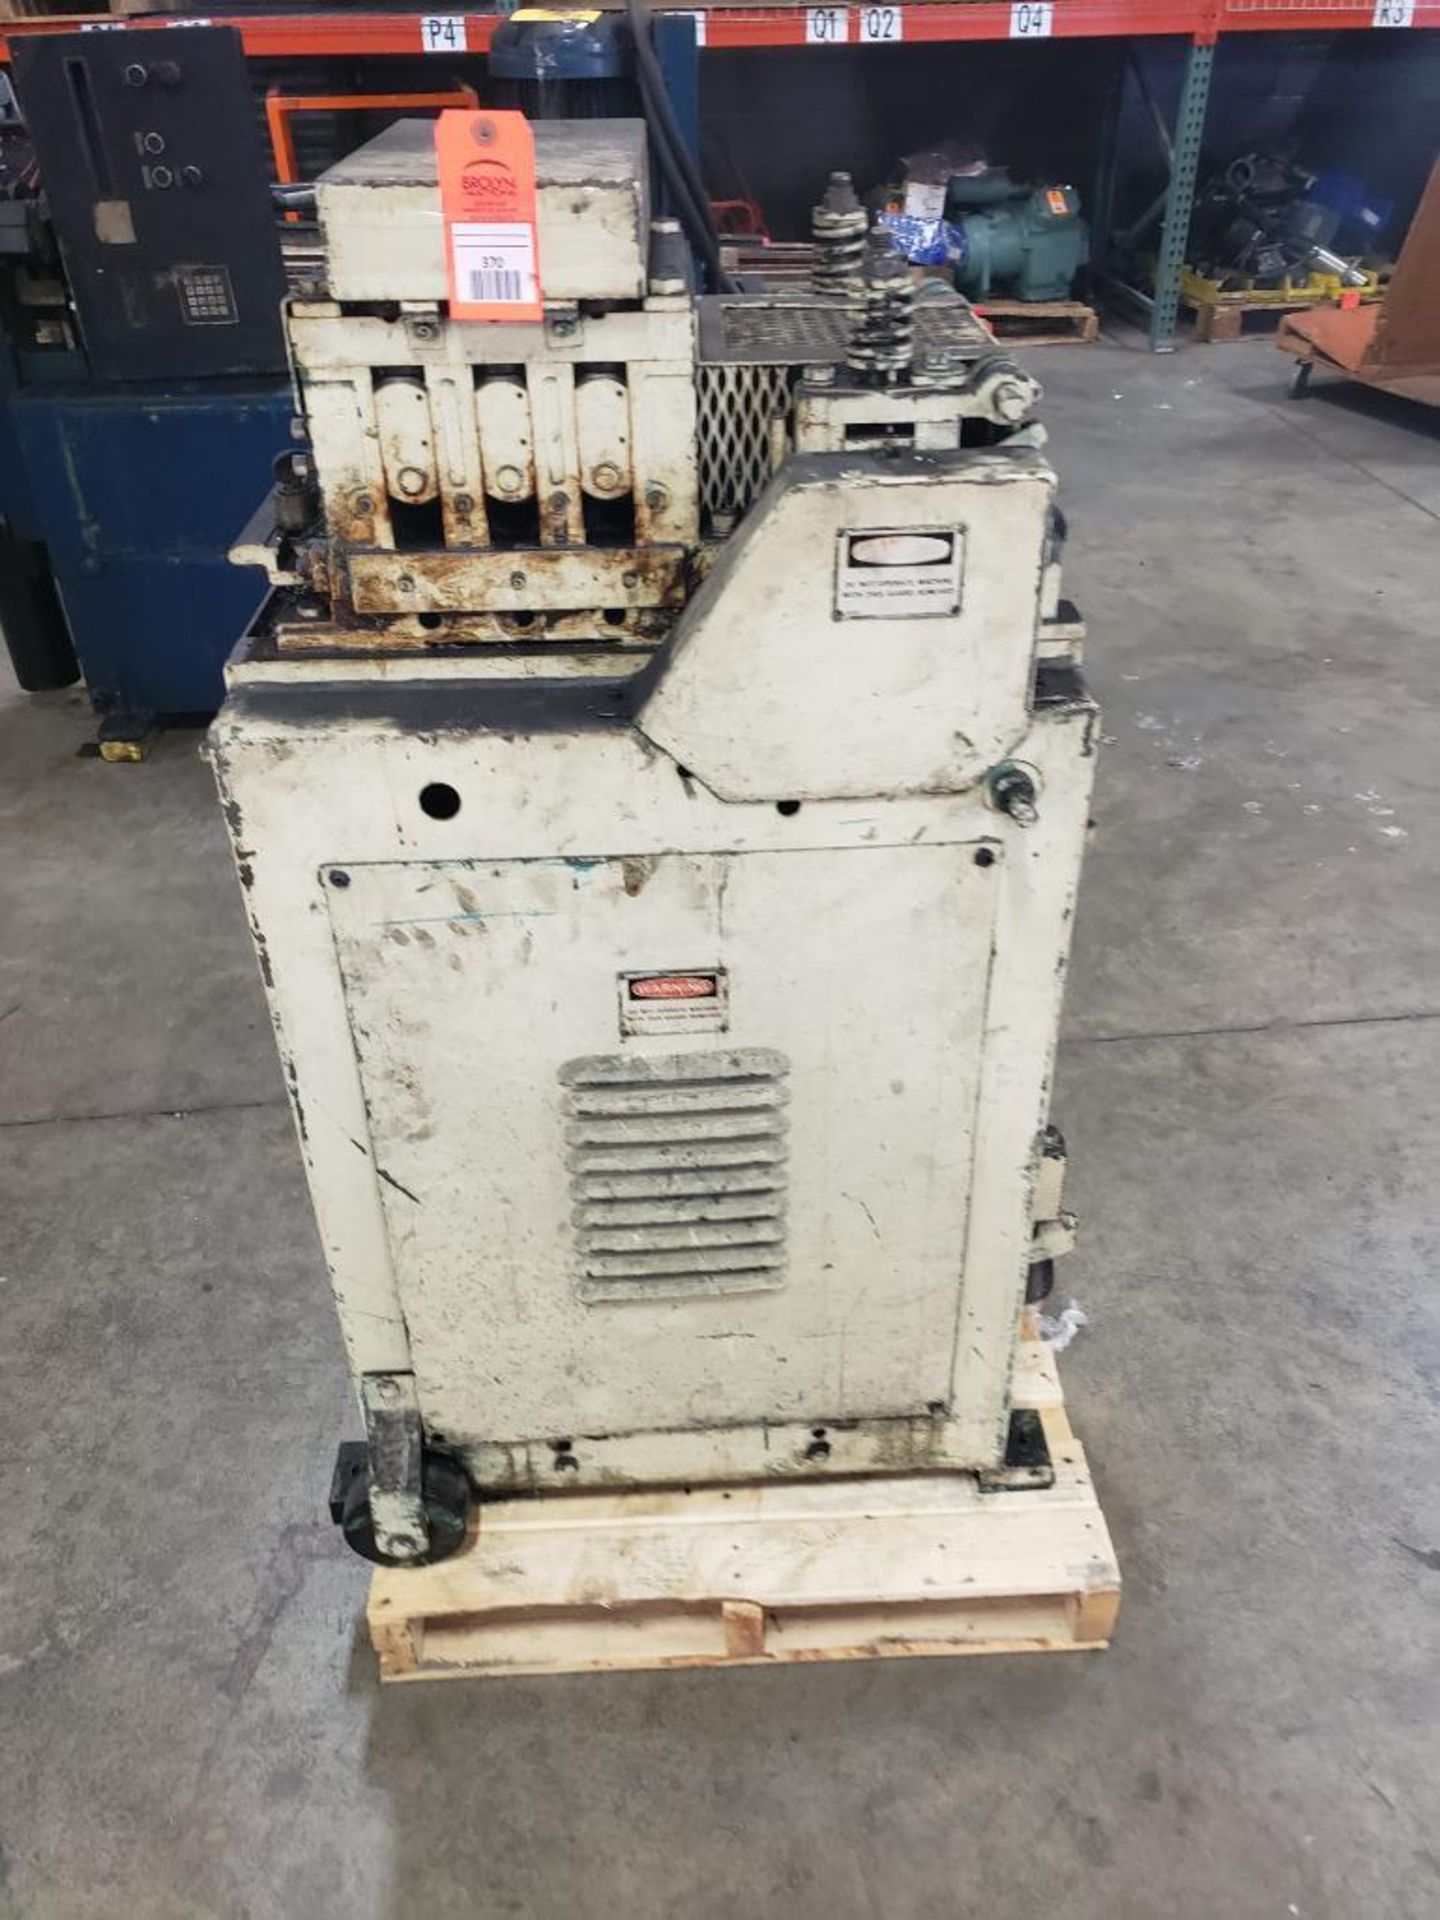 F.J. Littell Machine Co. No. 3 Continuous straightening machine. S/N: 84984-80. Code No.: 308-7PDL.